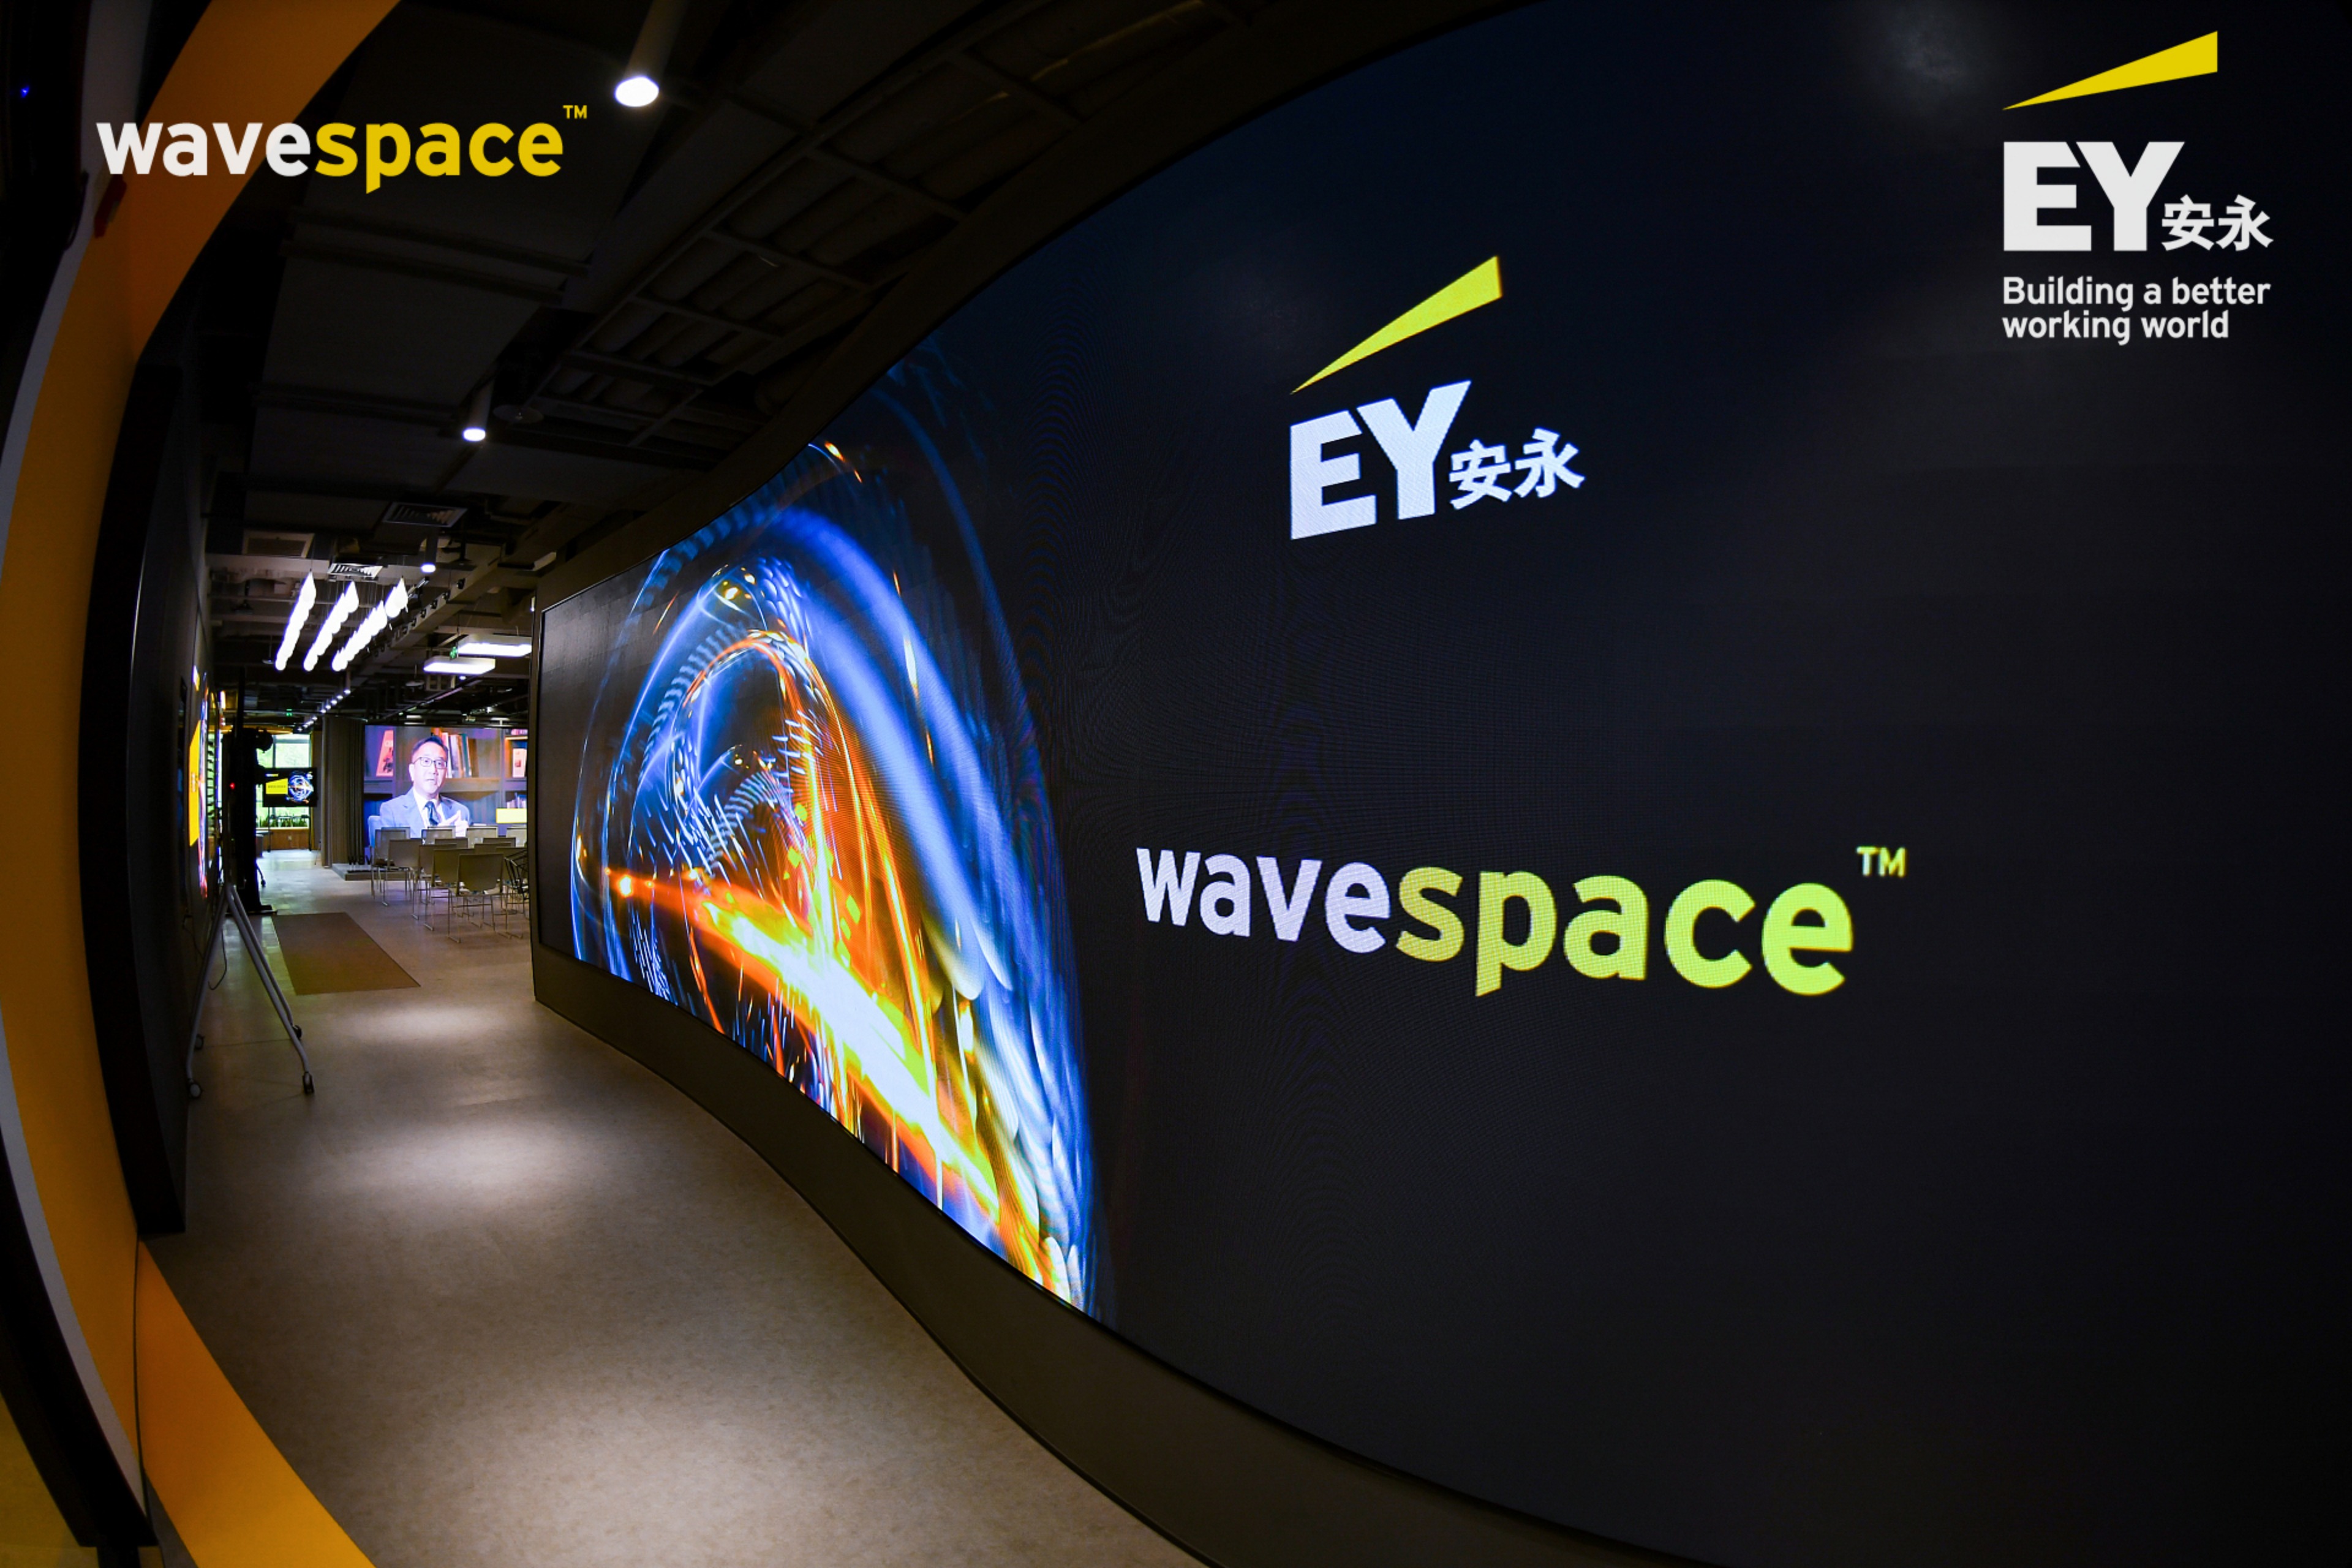 EY wavespace